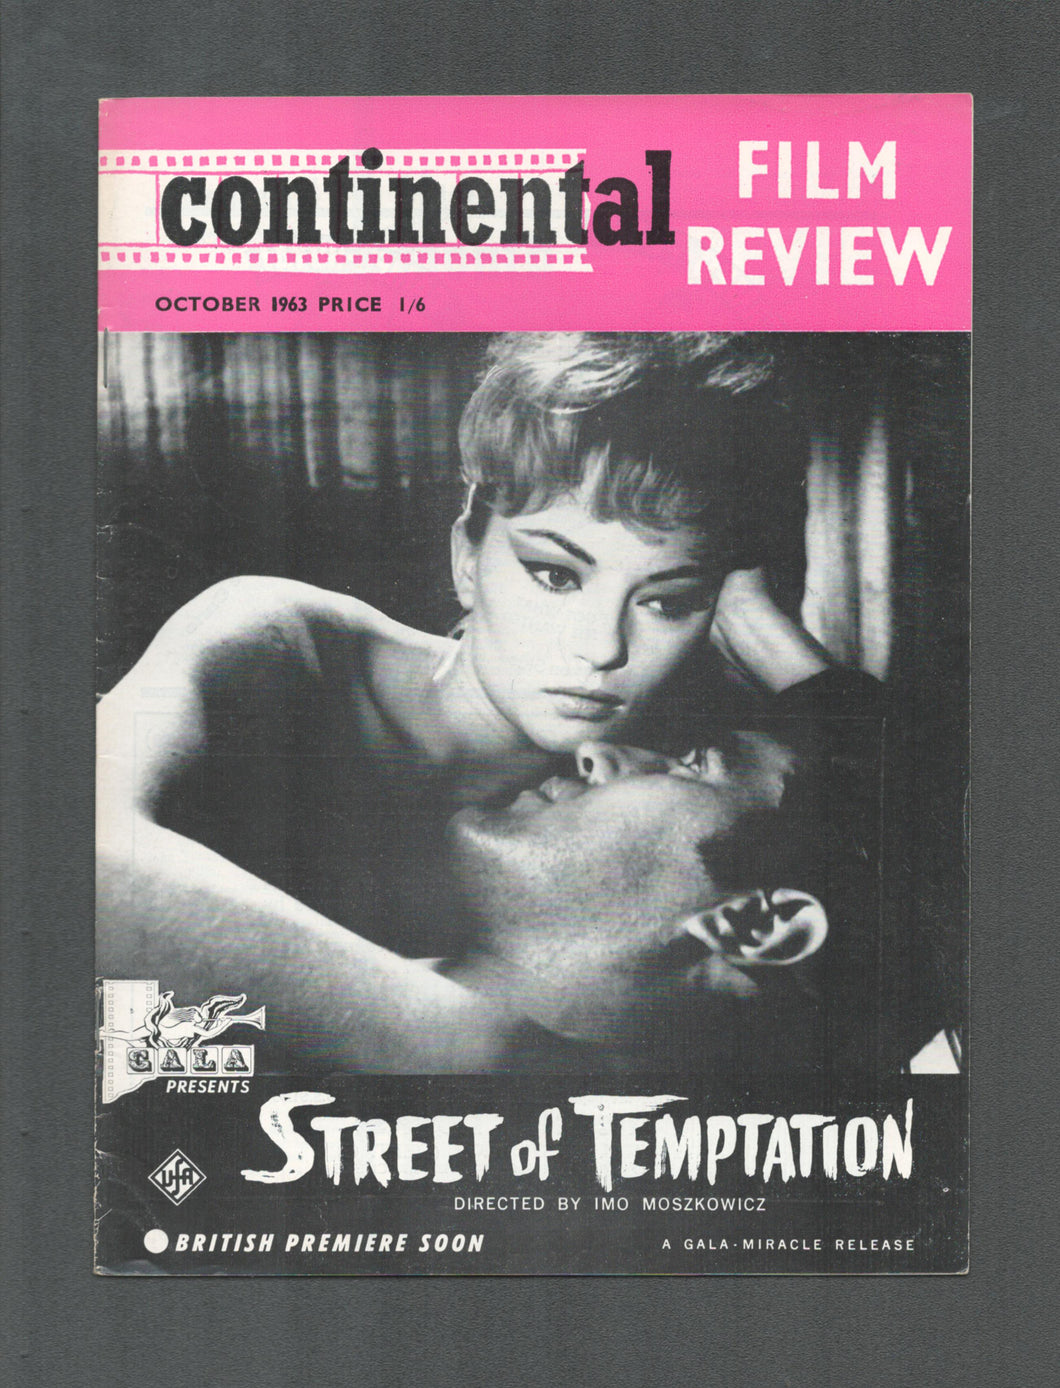 Continental Film Review Oct 1963